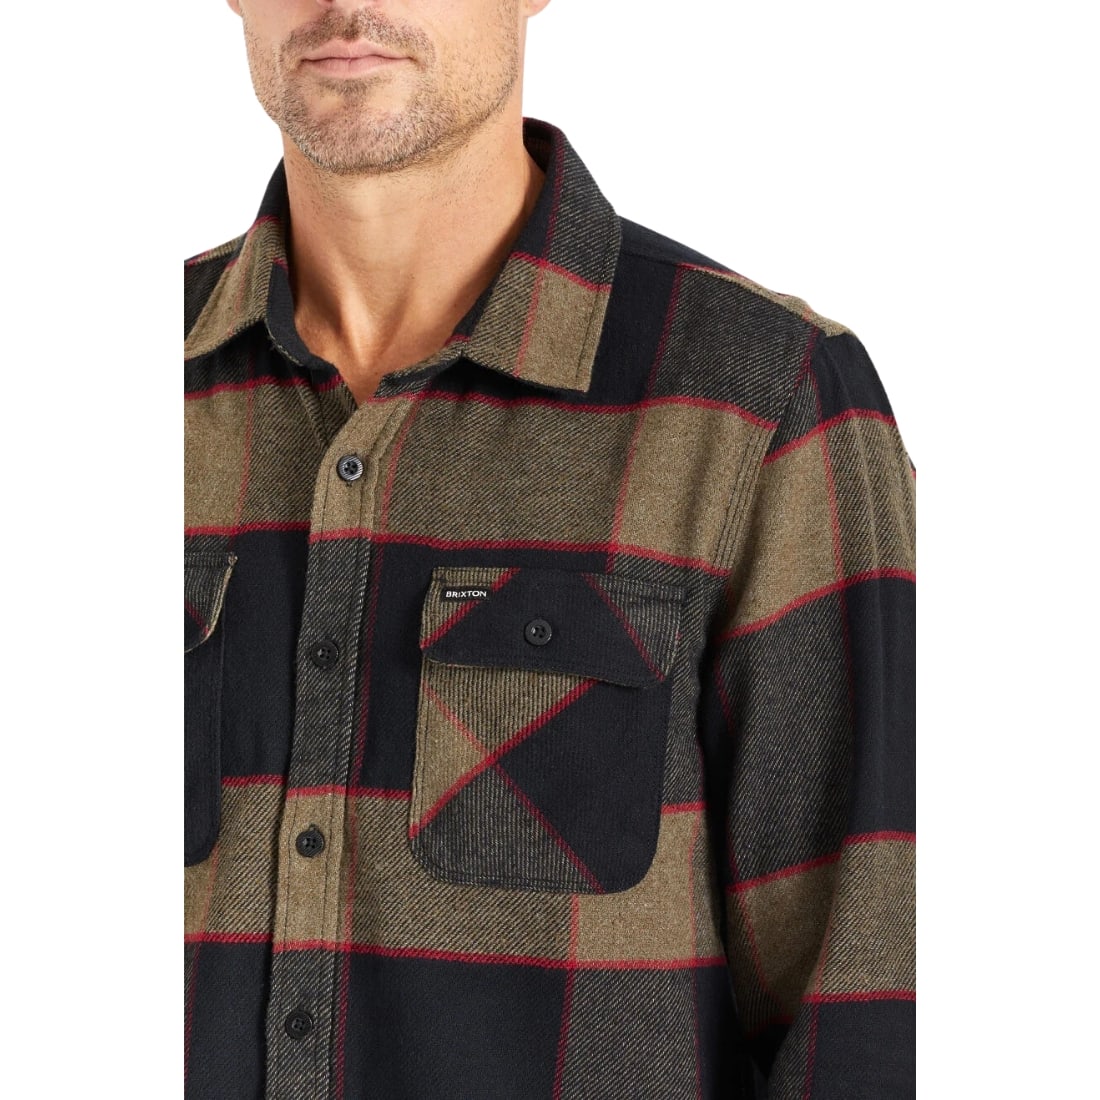 Brixton Bowery Longsleeve Flannel Shirt - Heather Grey/Charcoal - Mens Flannel Shirt by Brixton